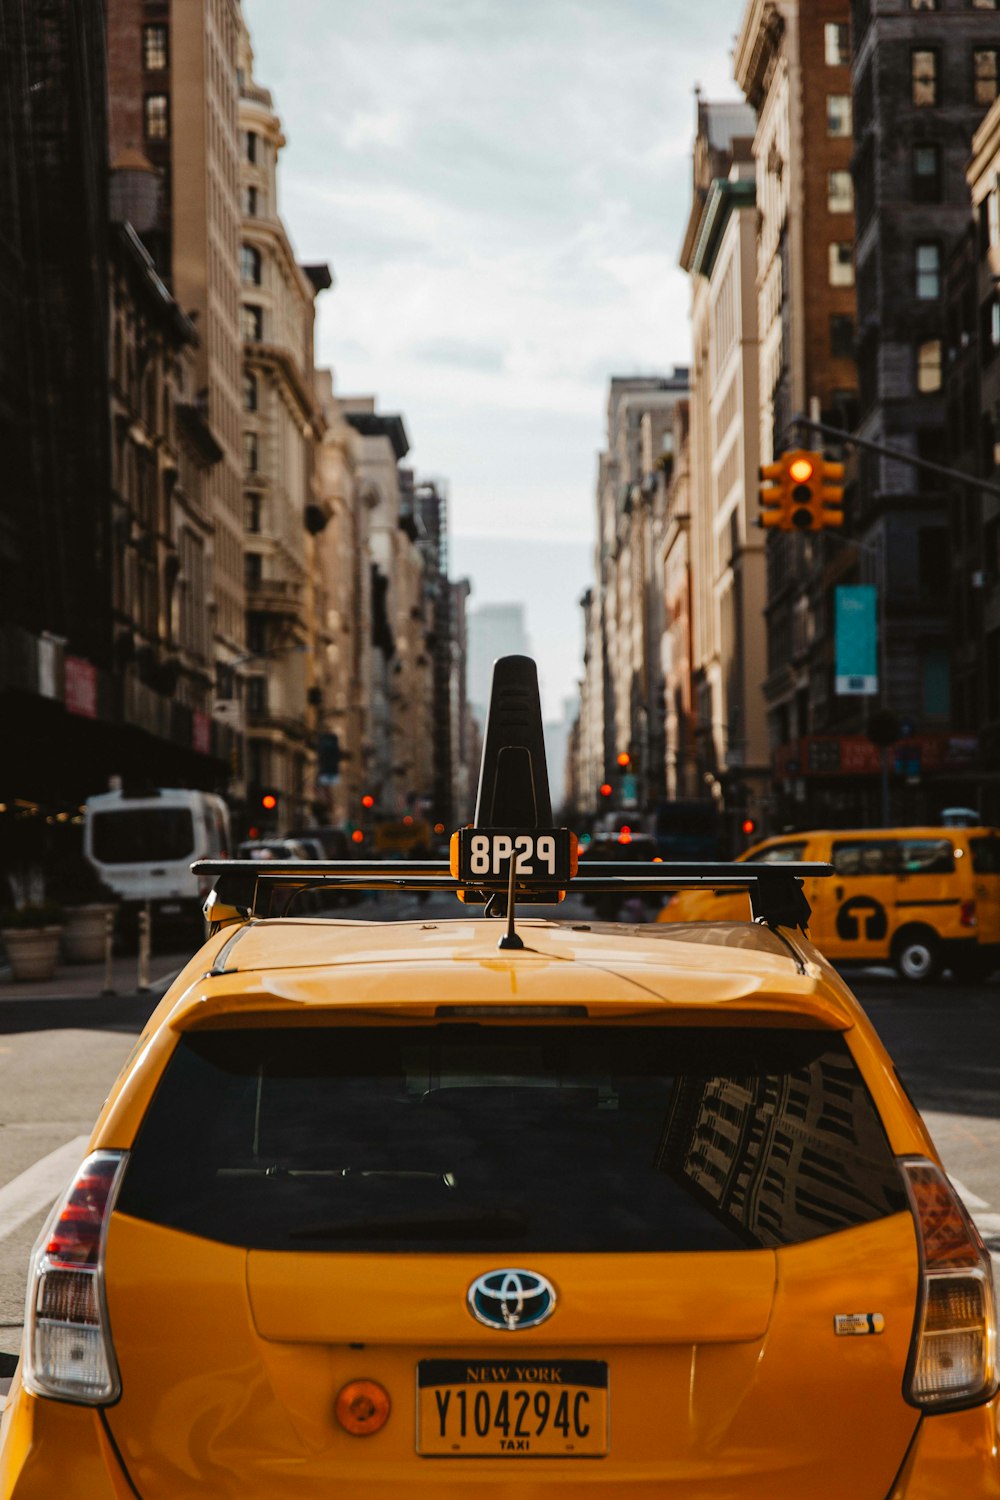 a taxi cab in a city